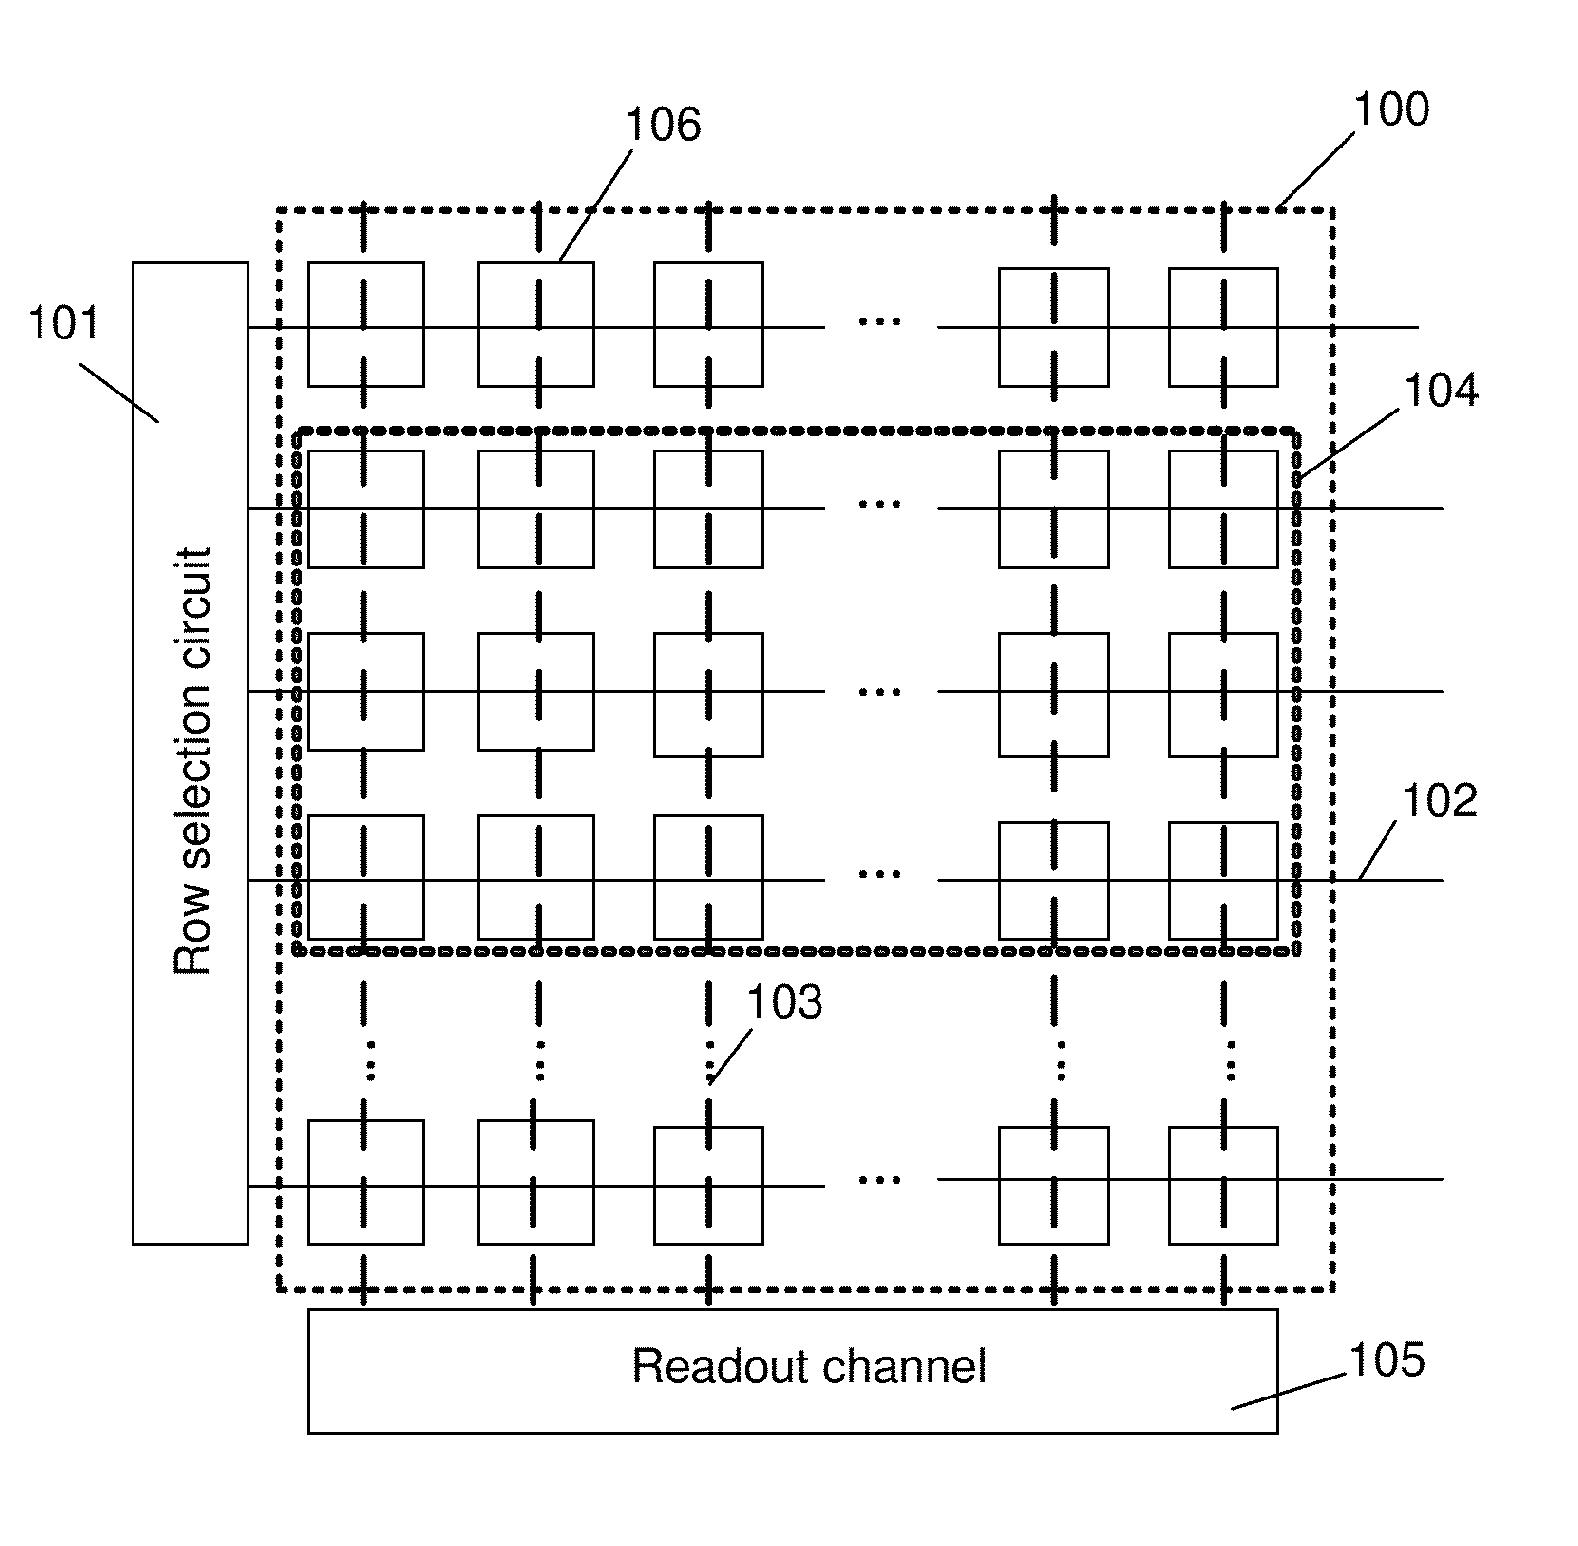 Automatic region of interest function for image sensors